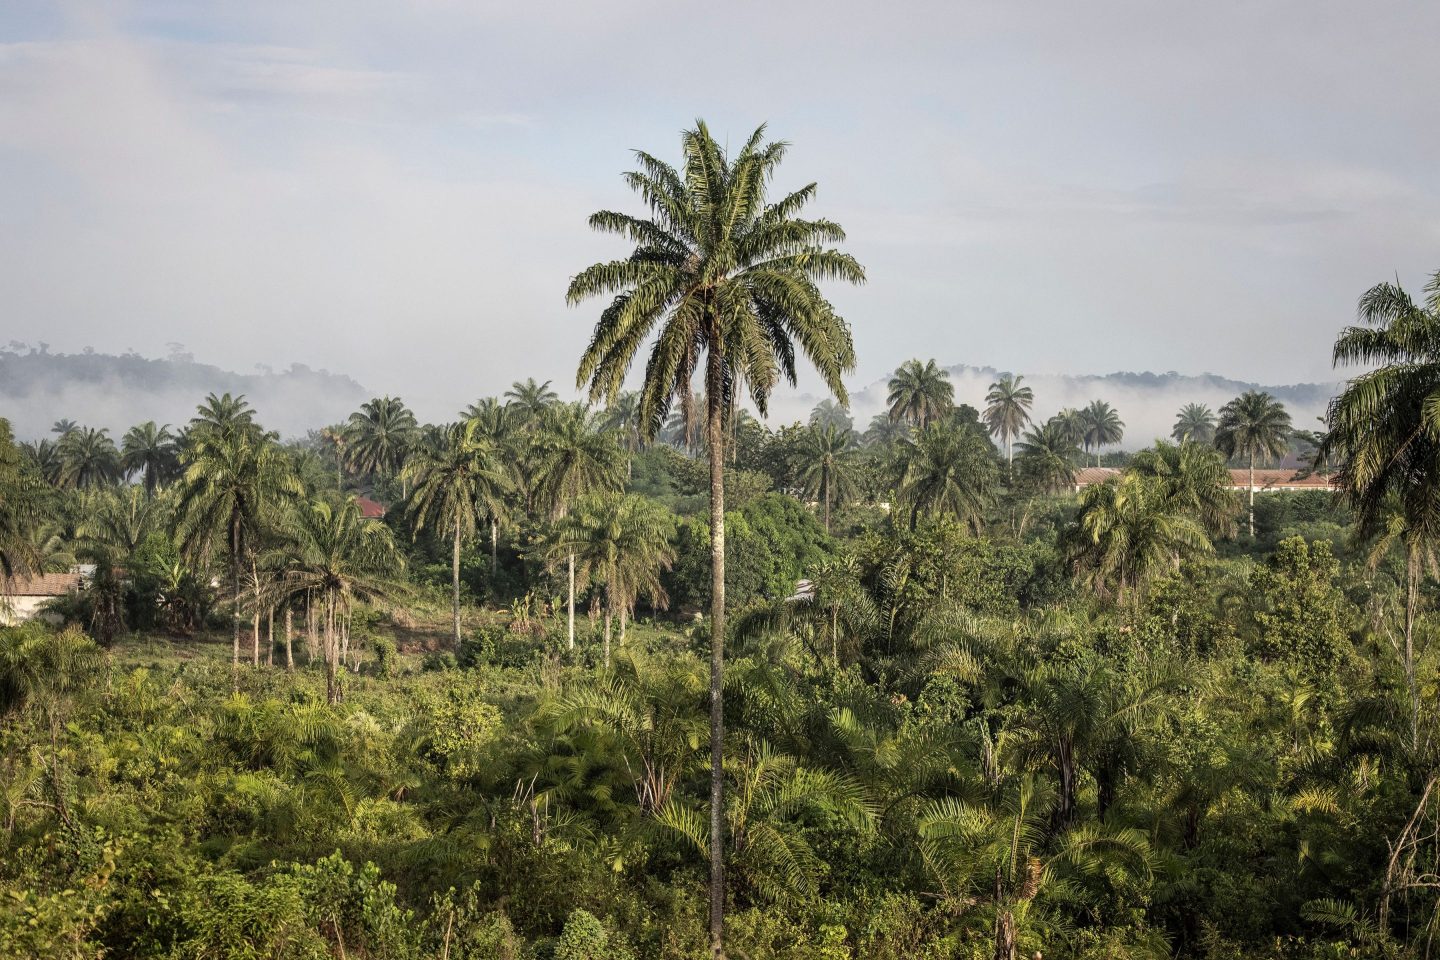 Carbon colonialism’ in Africa meets resistance as companies seek to sell carbon credits from conservation projects that often upend local livelihoods—or worse